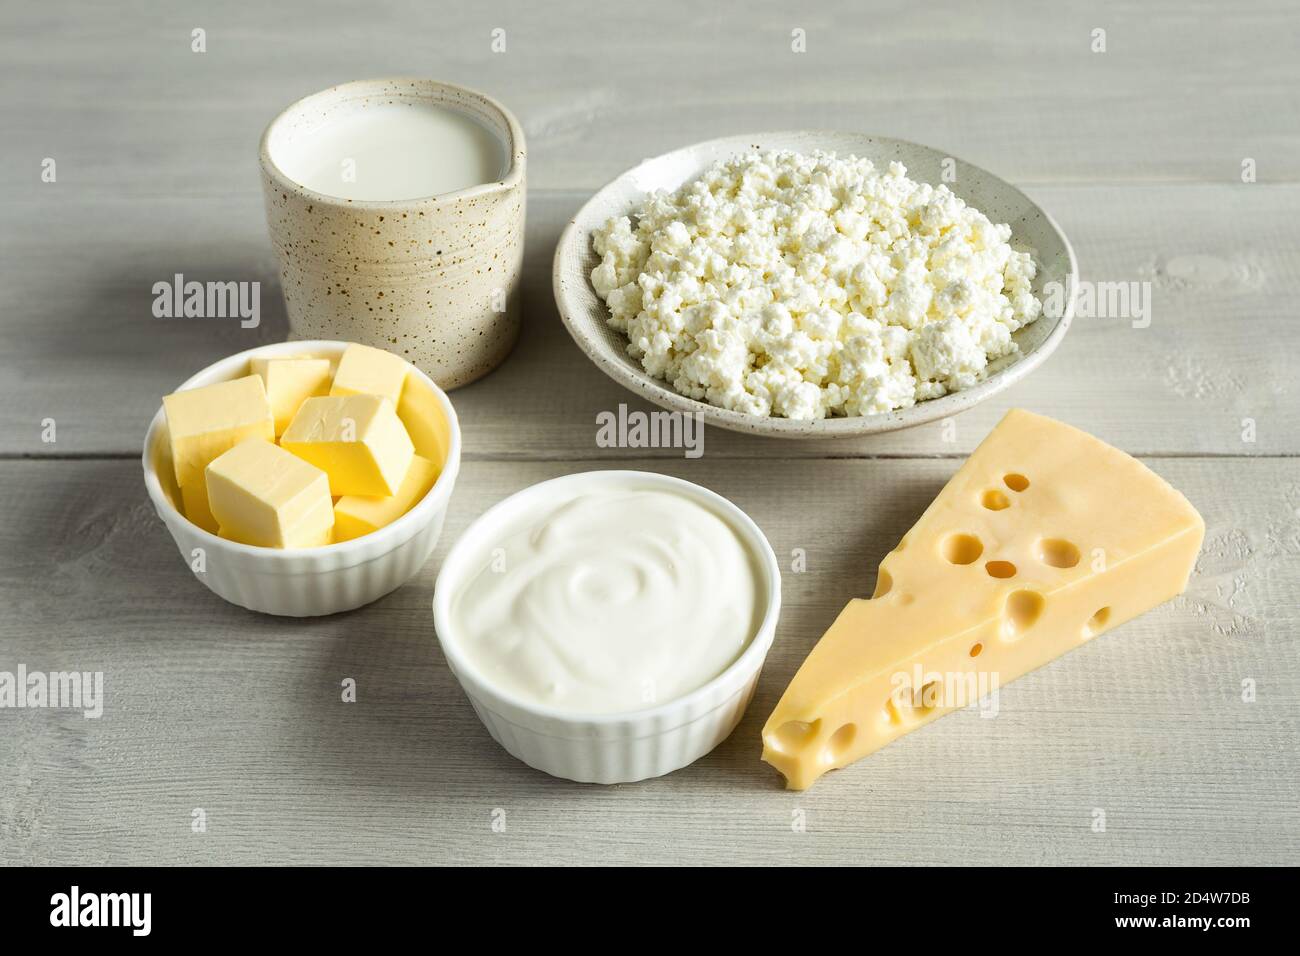 Most common dairy products are butter, cheese, milk, sour cream, cottage cheese in a white dish on a white wooden background close up. Natural, organi Stock Photo